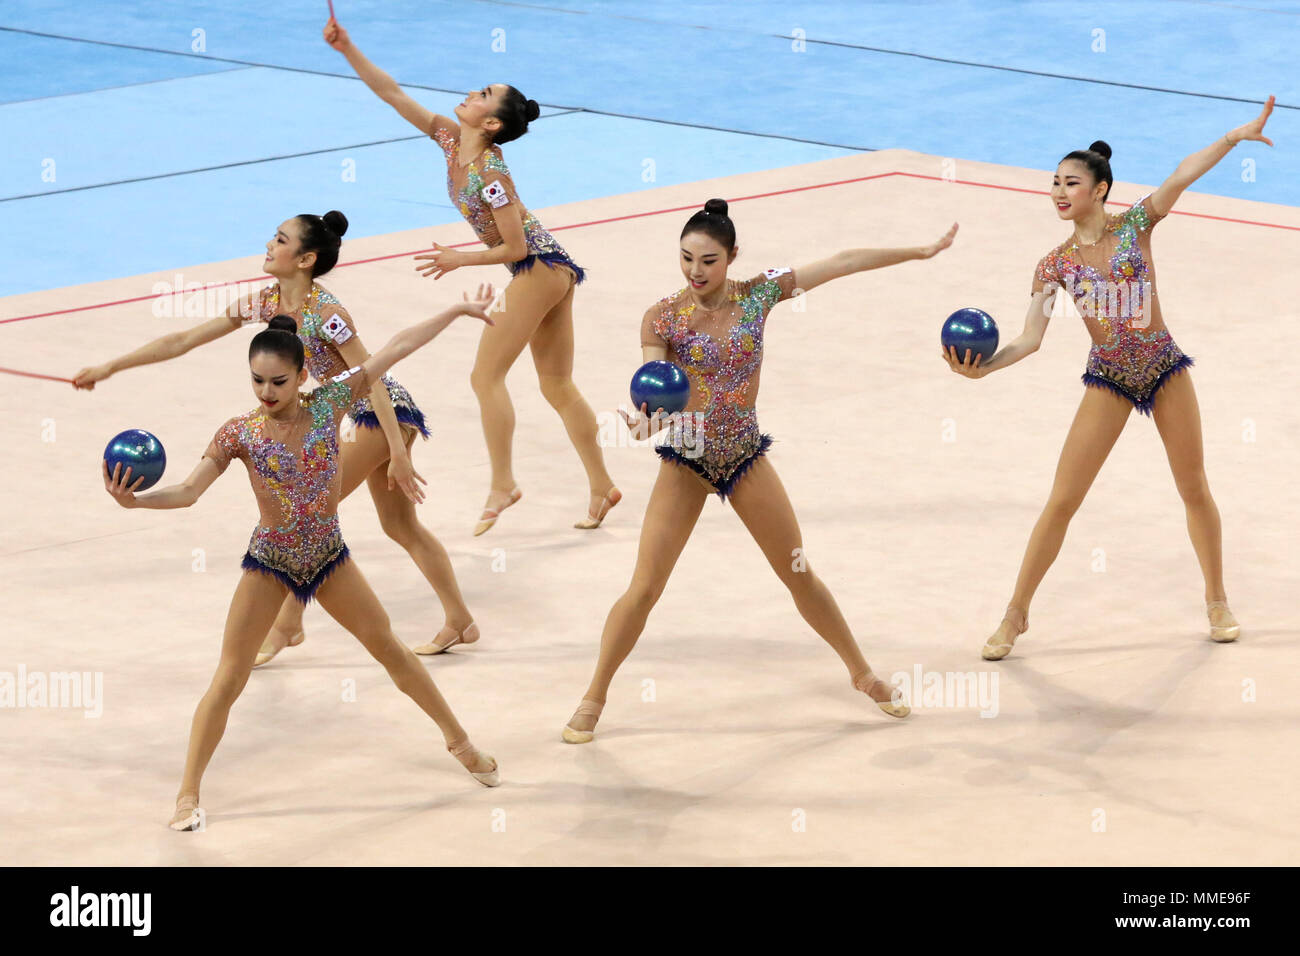 Sofia, Bulgaria - 31 March, 2018: Team Korea performs with balls and ropes during Rhythmic Gymnastics World Cup Sofia 2018. Group tournament. Stock Photo